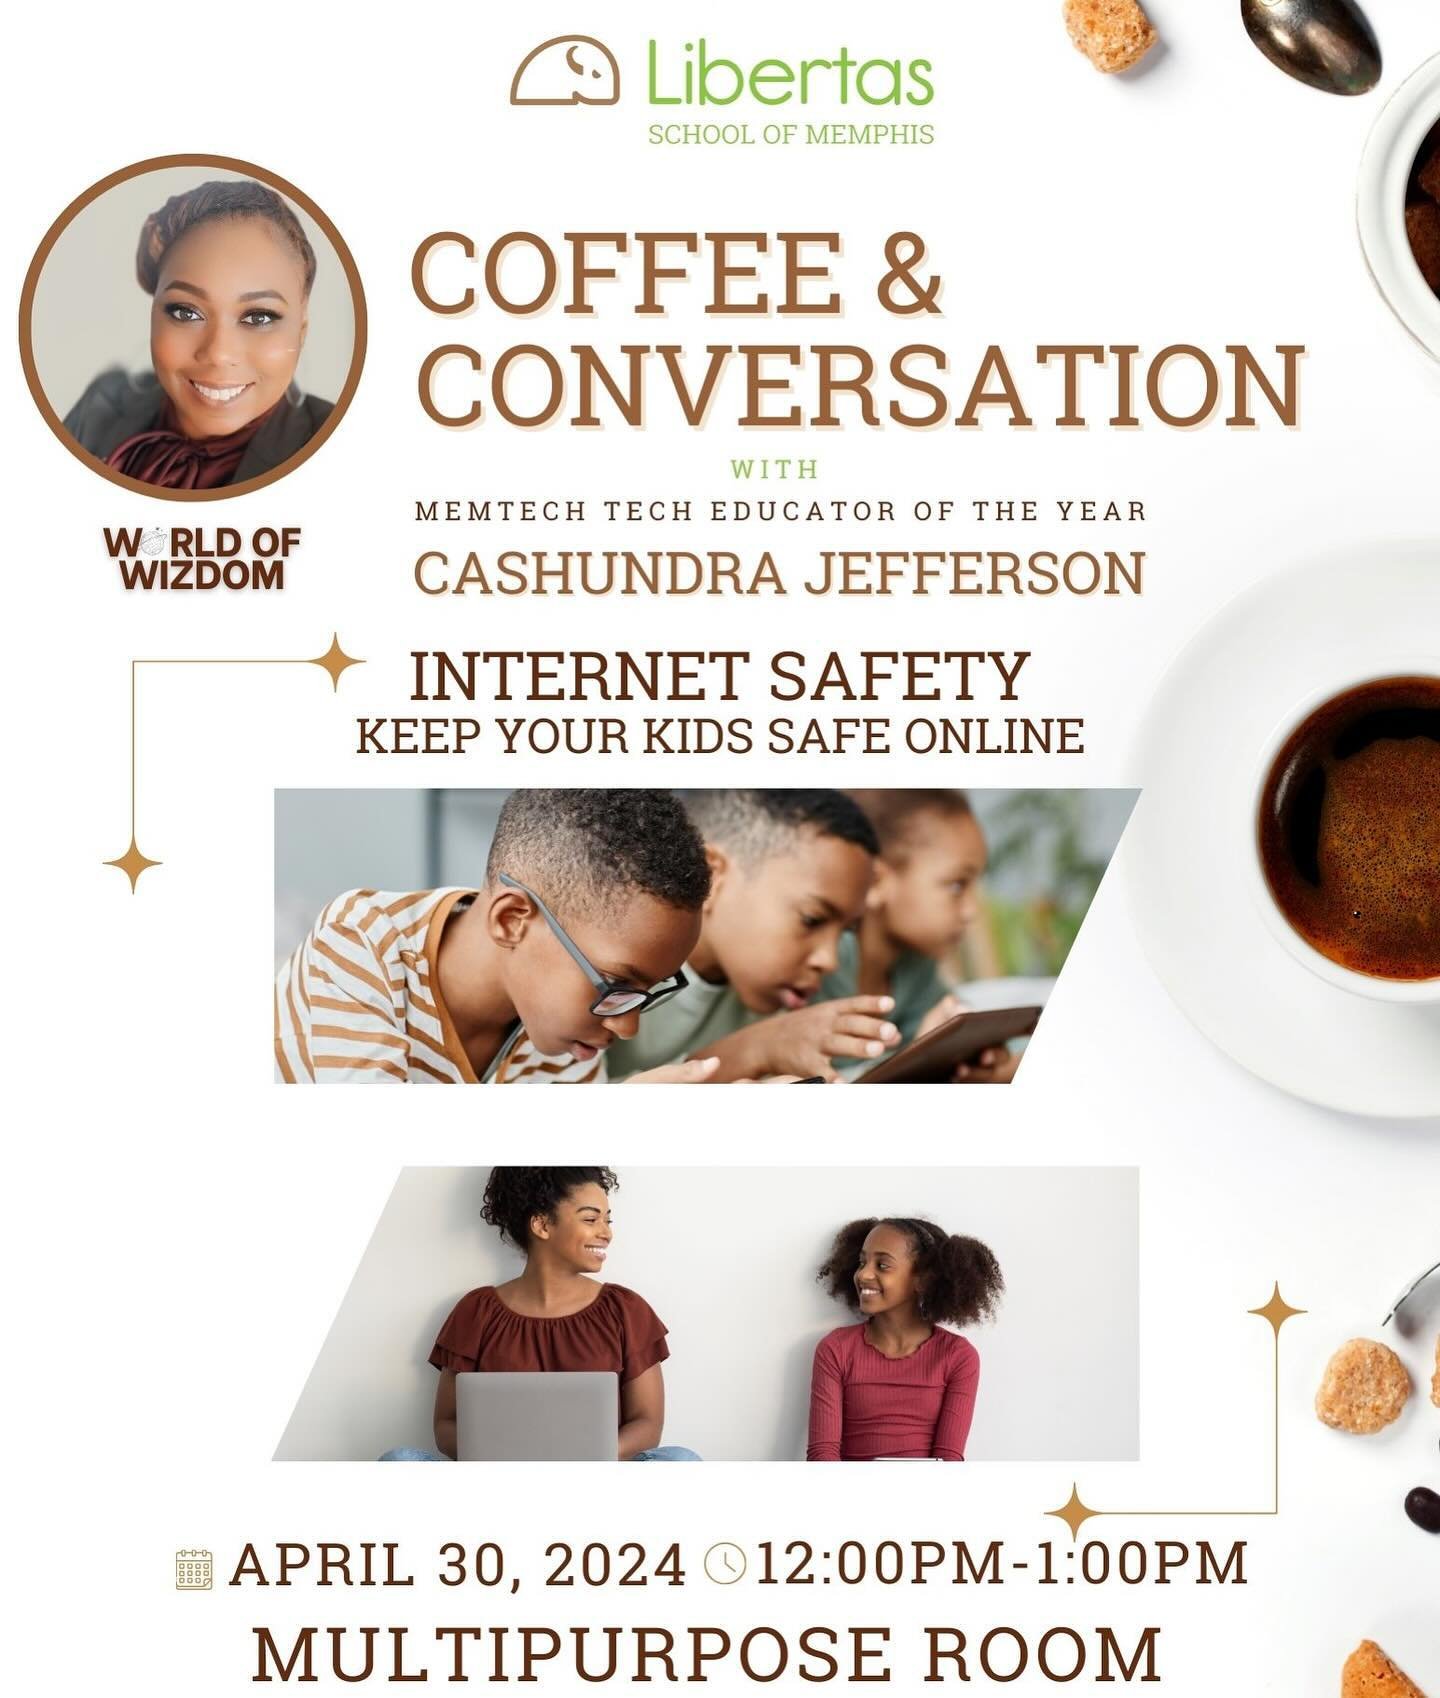 Join us today at 12 p.m. in the Multipurpose Room to discuss internet safety. Ms. Cashundra Jefferson will discuss how to keep students safe while browsing the internet. This event is in person only. See you there!